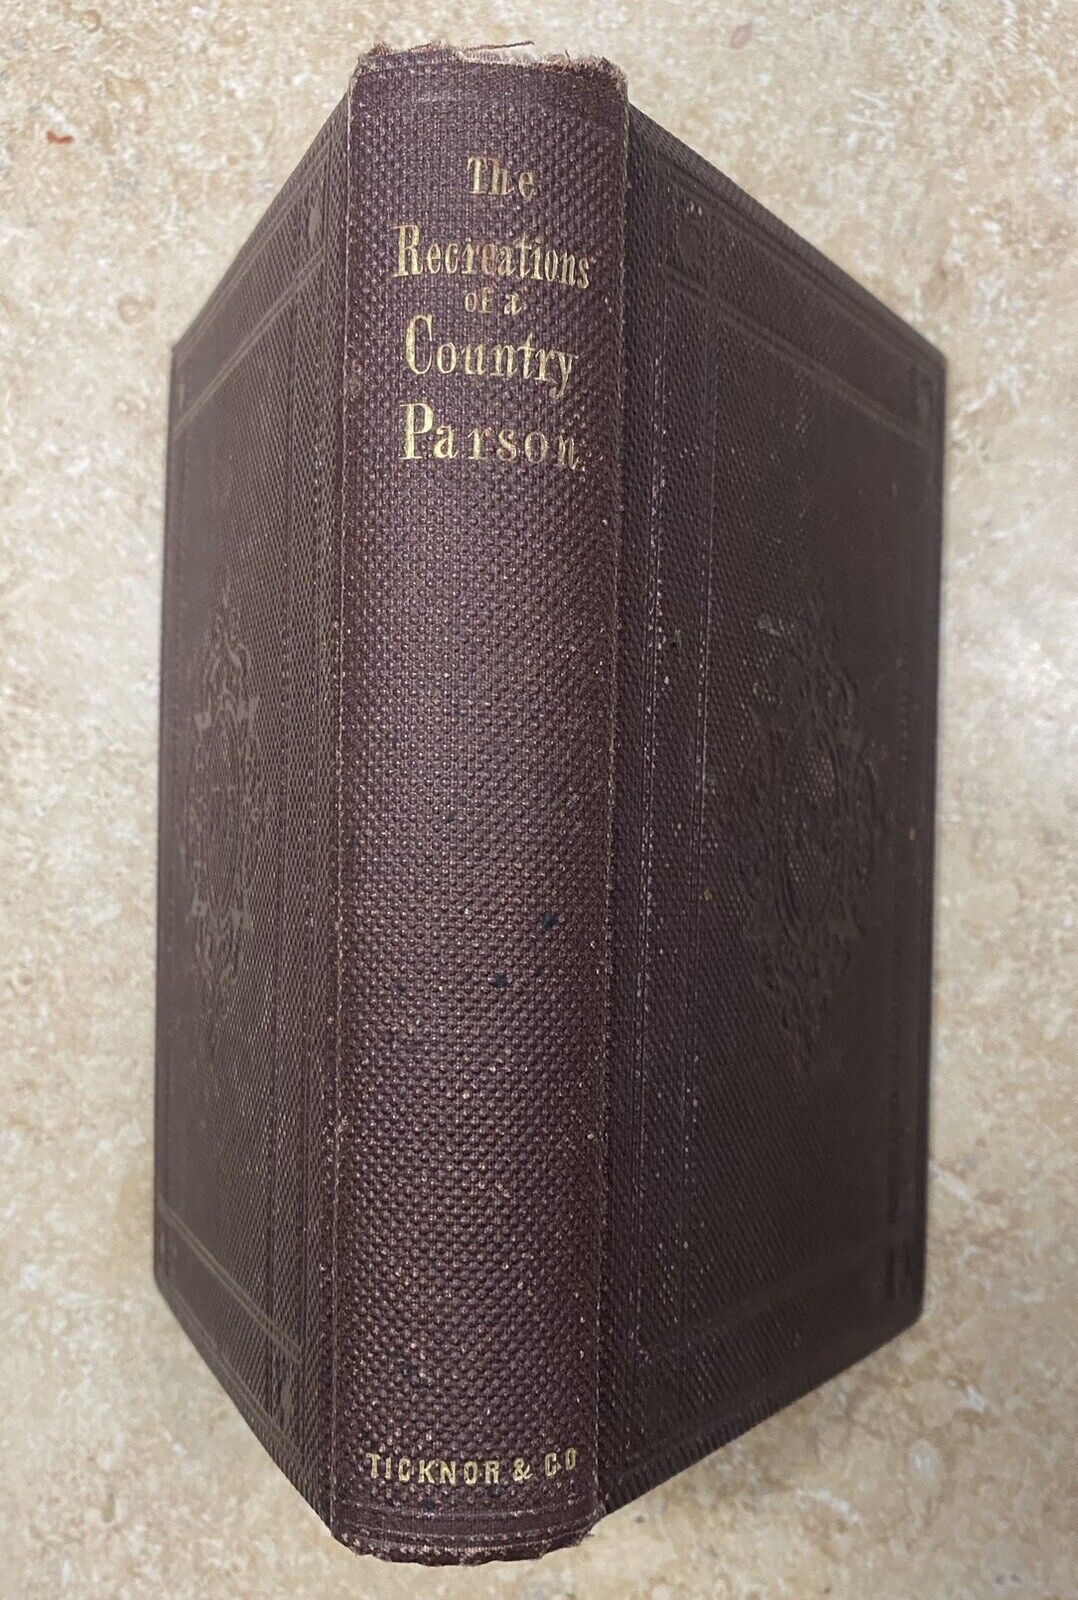 1861 The Recreations of a Country Parson by Andrew Kennedy Hutchison Boyd, 1st